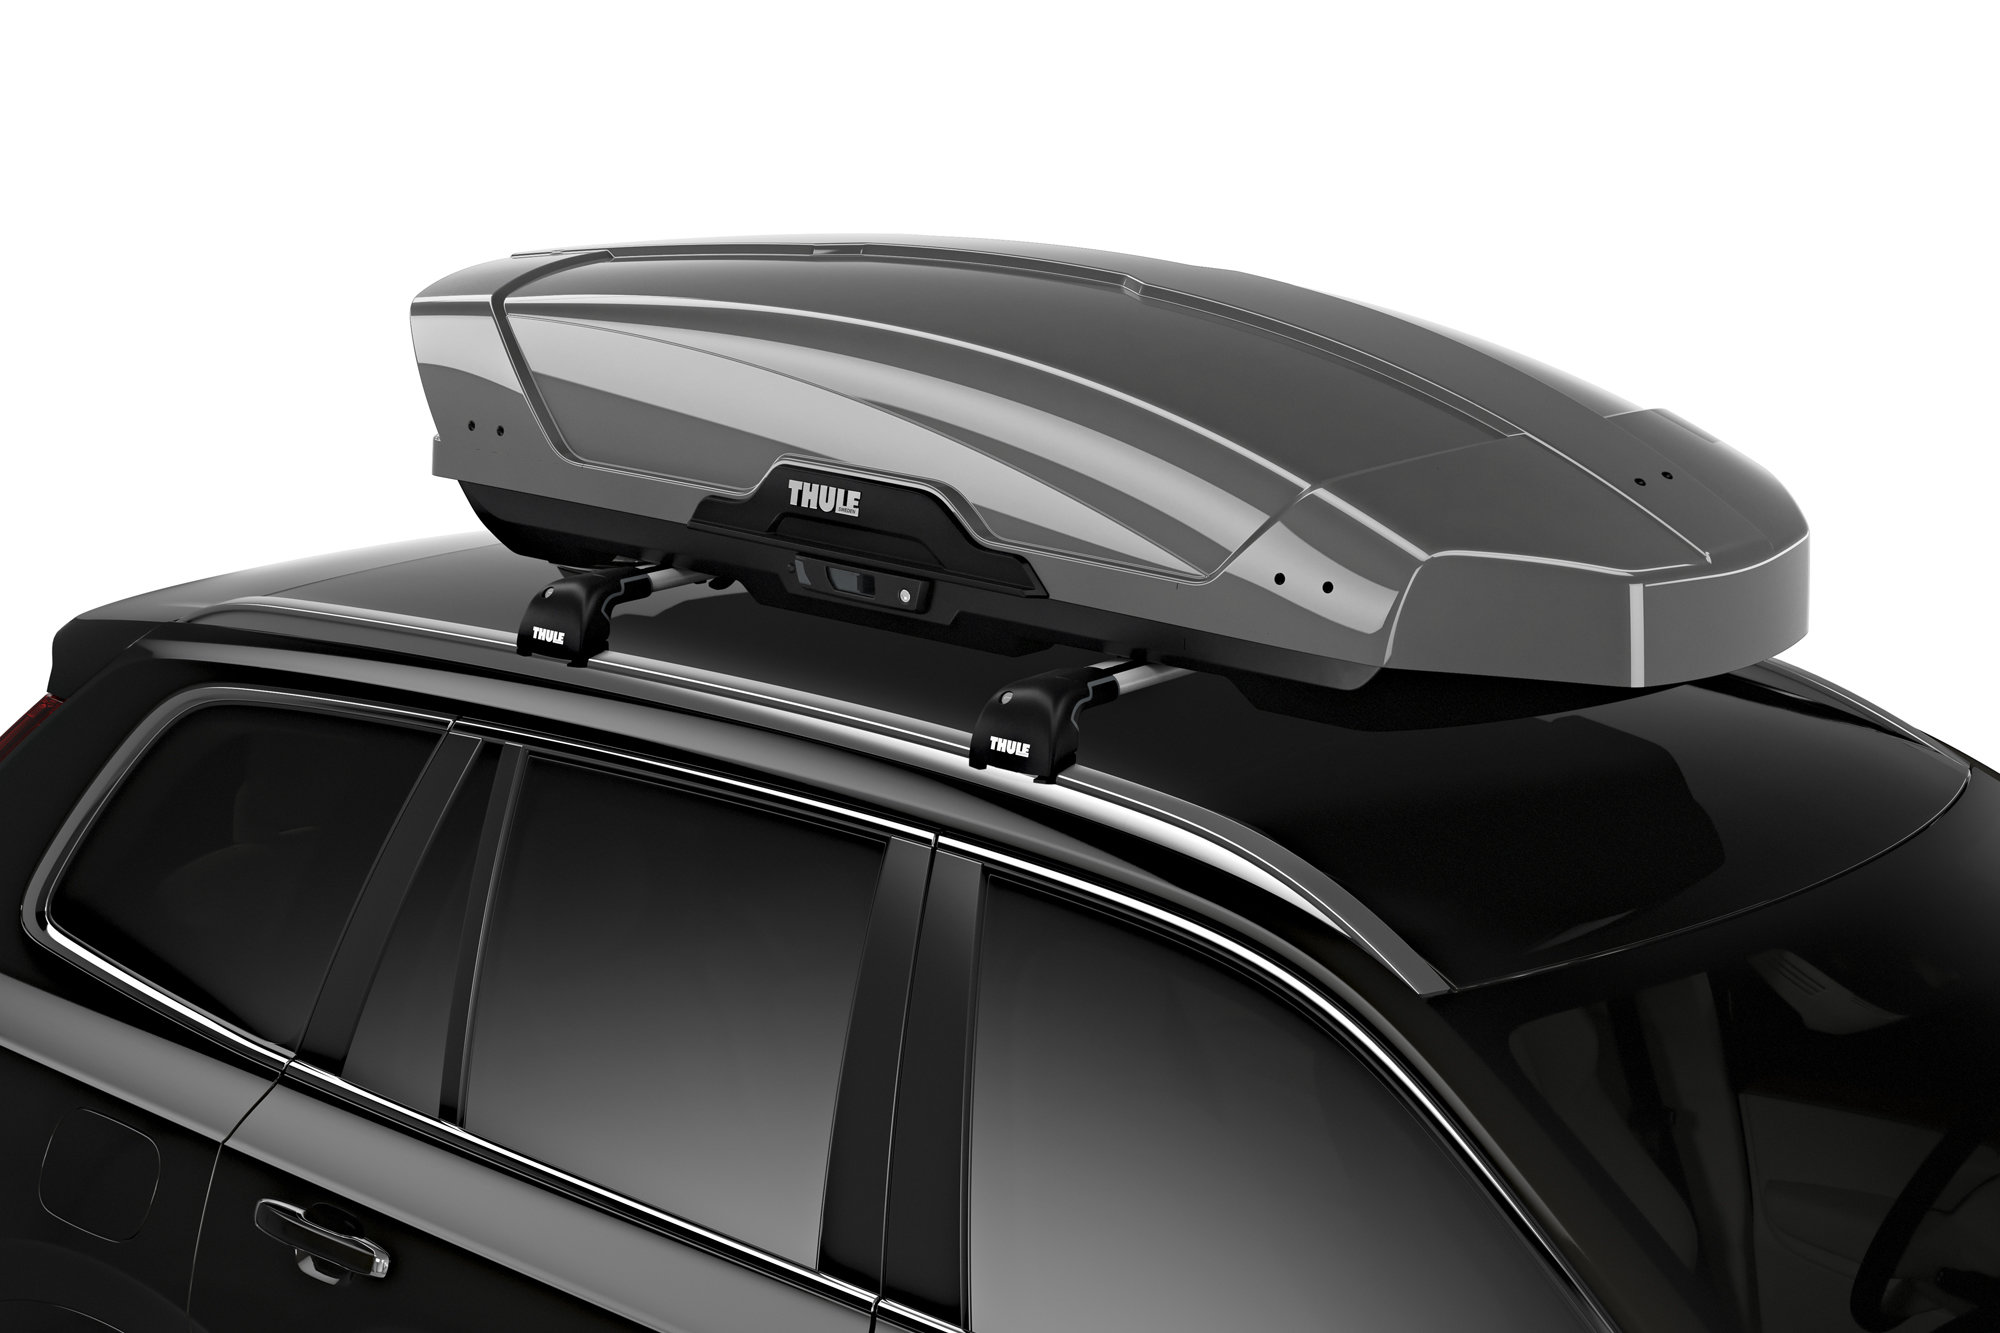 https://www.quadratec.com/sites/default/files/styles/product_zoomed/public/product_images/Thule-Motion-XT-Large-Titan-angle-installed_0.jpg